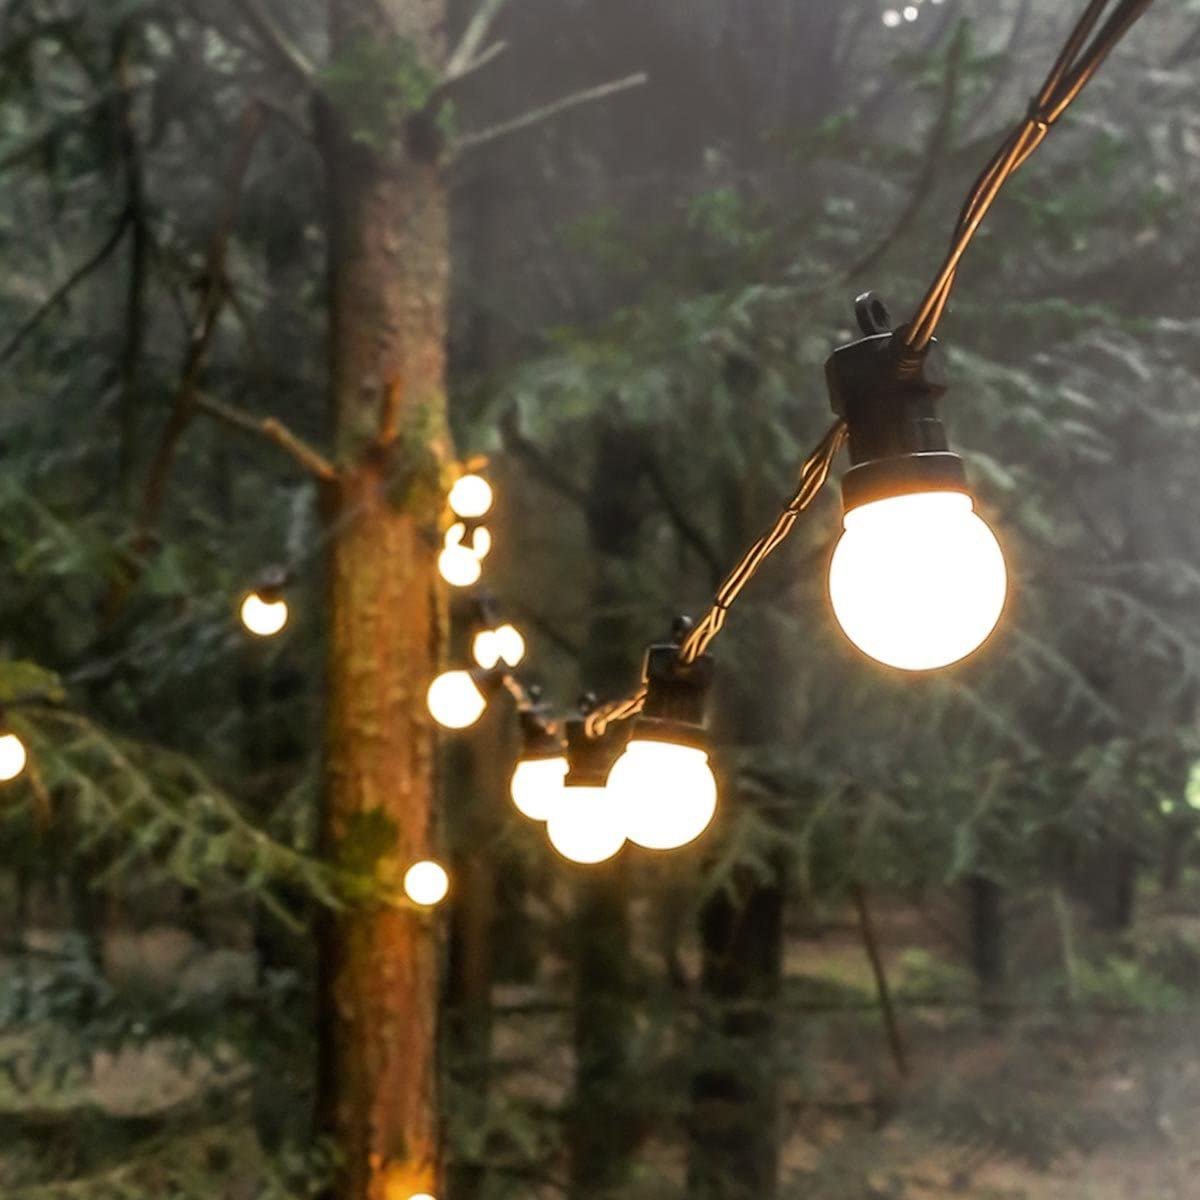  Each string features 20 shatterproof bulbs evenly spaced across 14.6 m of thick black weatherproof cable. With simple connectors on the ends of each string, it's easy to connect them together to create the perfect length for your desired space.